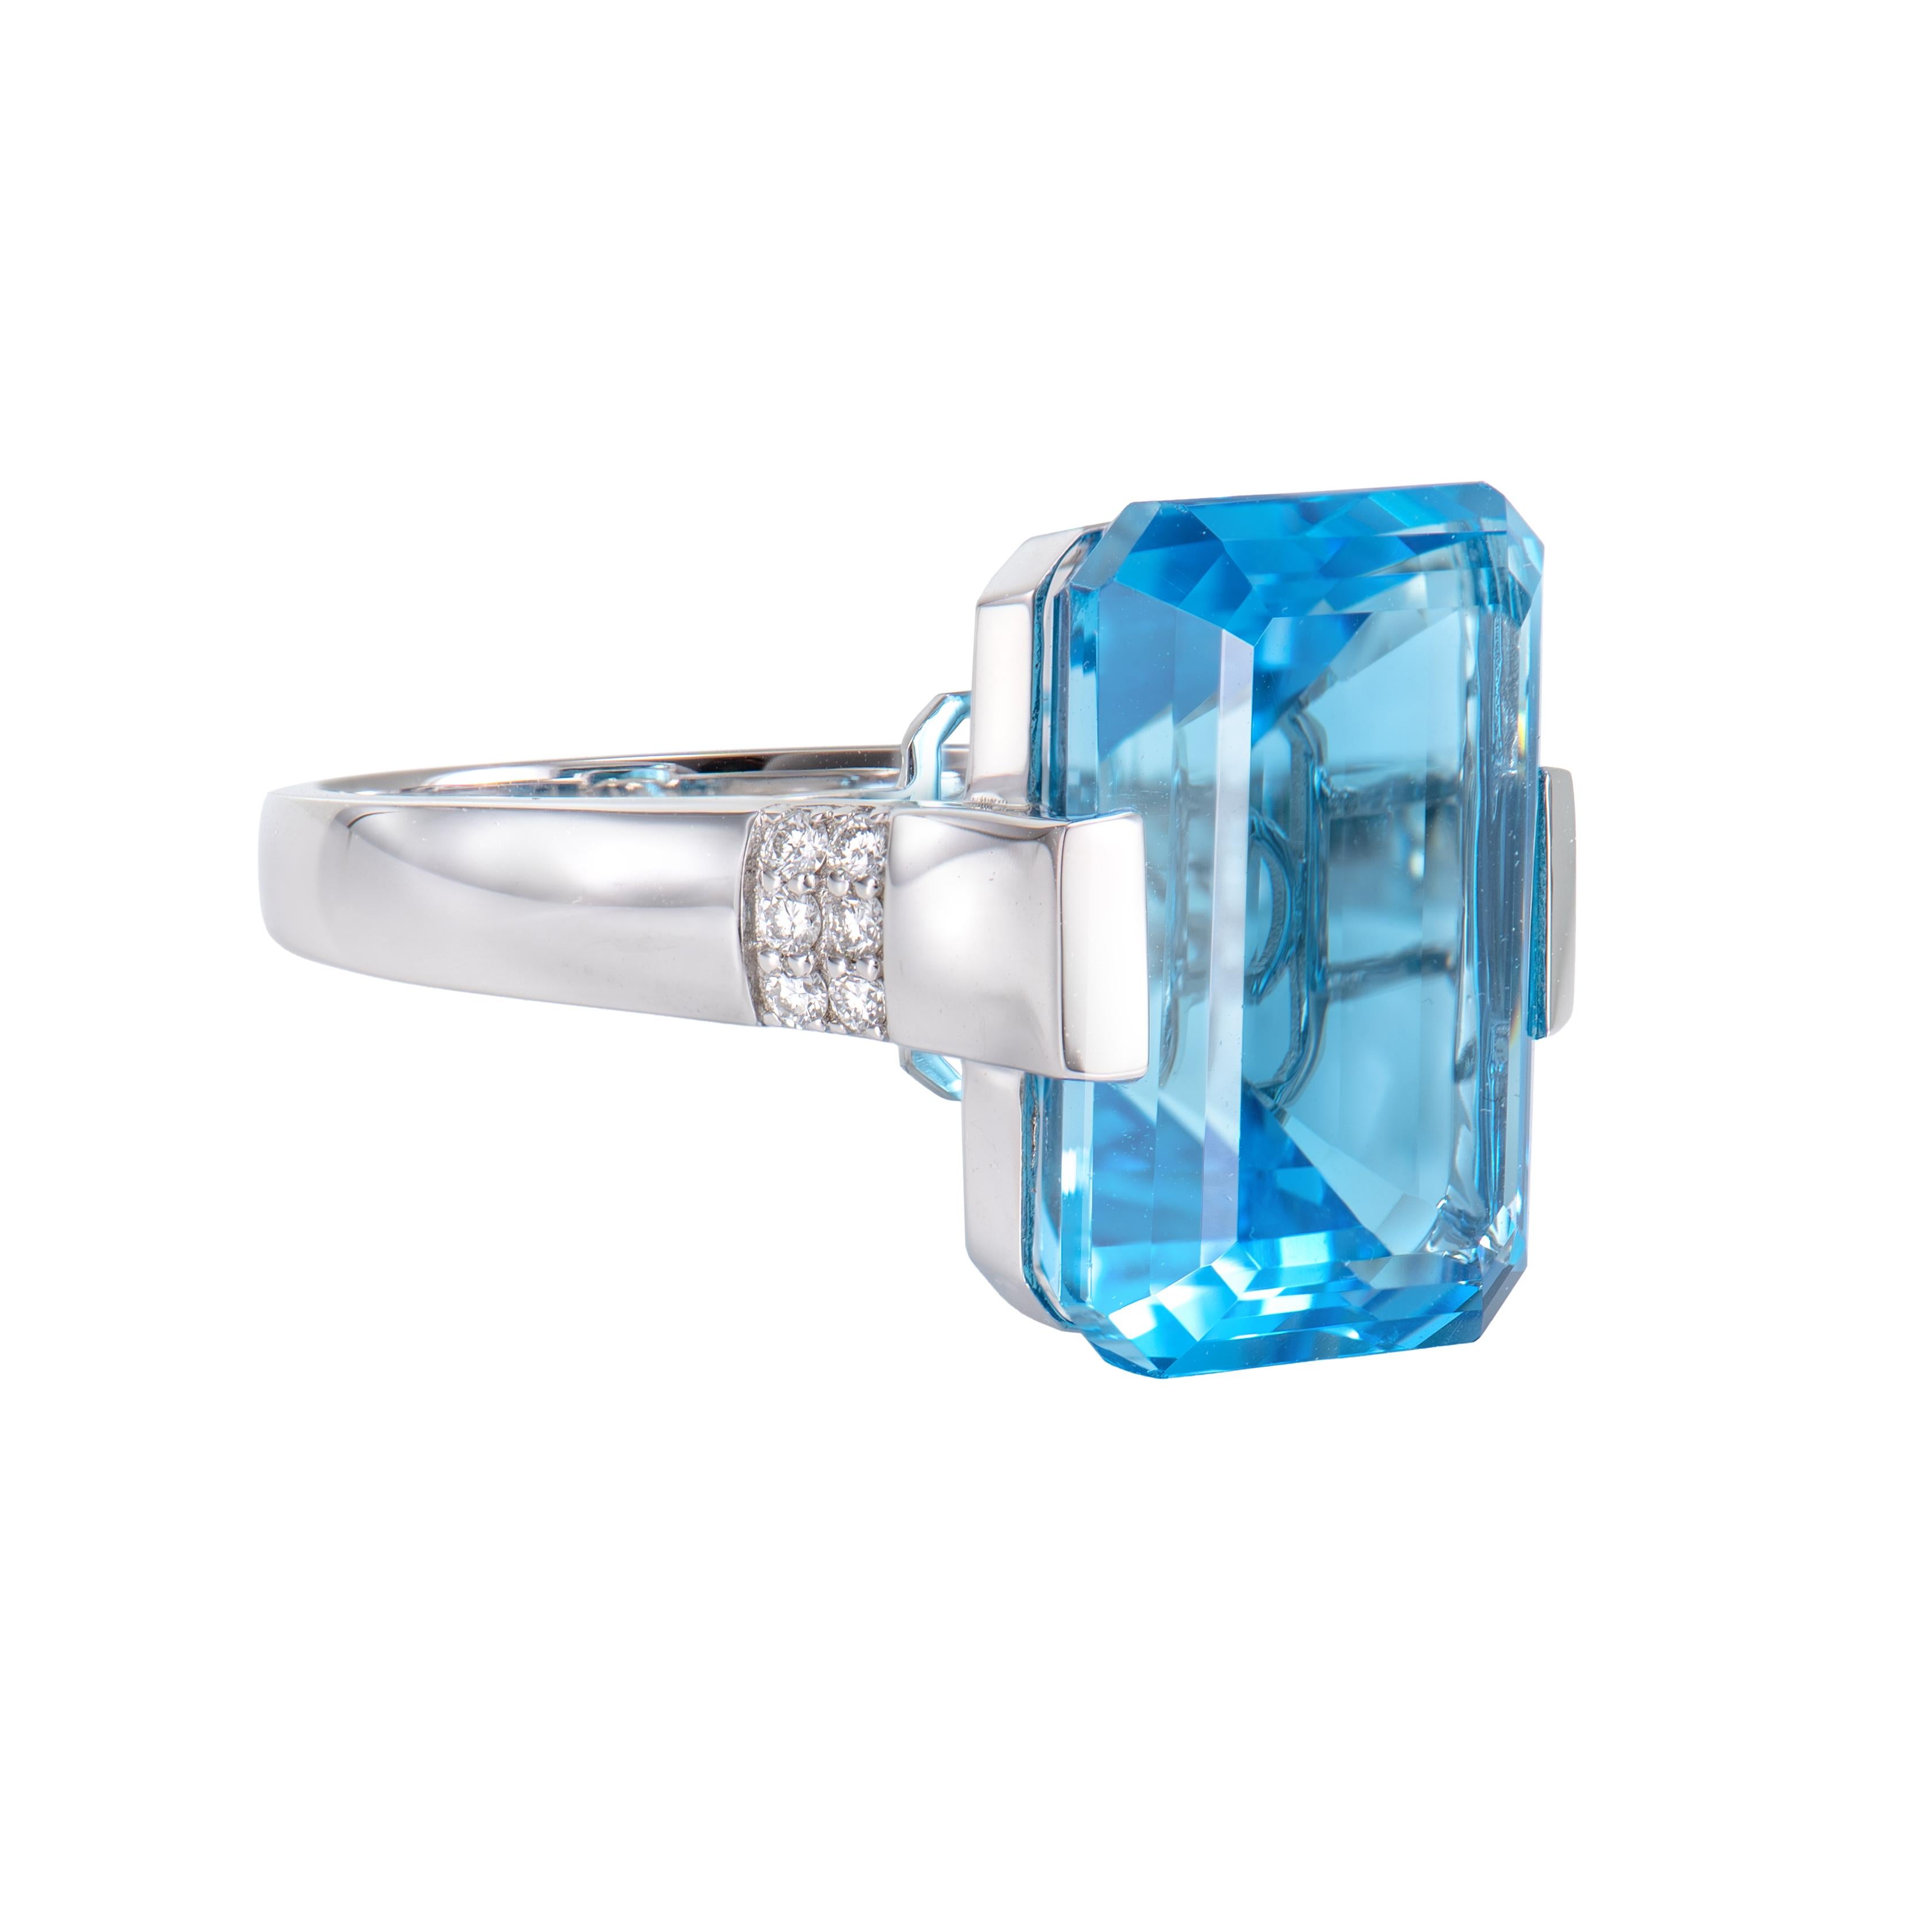 It's a fancy Swiss Blue Topaz Ring in An Octagon shape with blue hue. The Ring is elegant and can be worn for many occasions. It is useful to organize your feelings and help to heal your negative feelings.

Swiss Blue Topaz Fancy Ring in 18 Karat